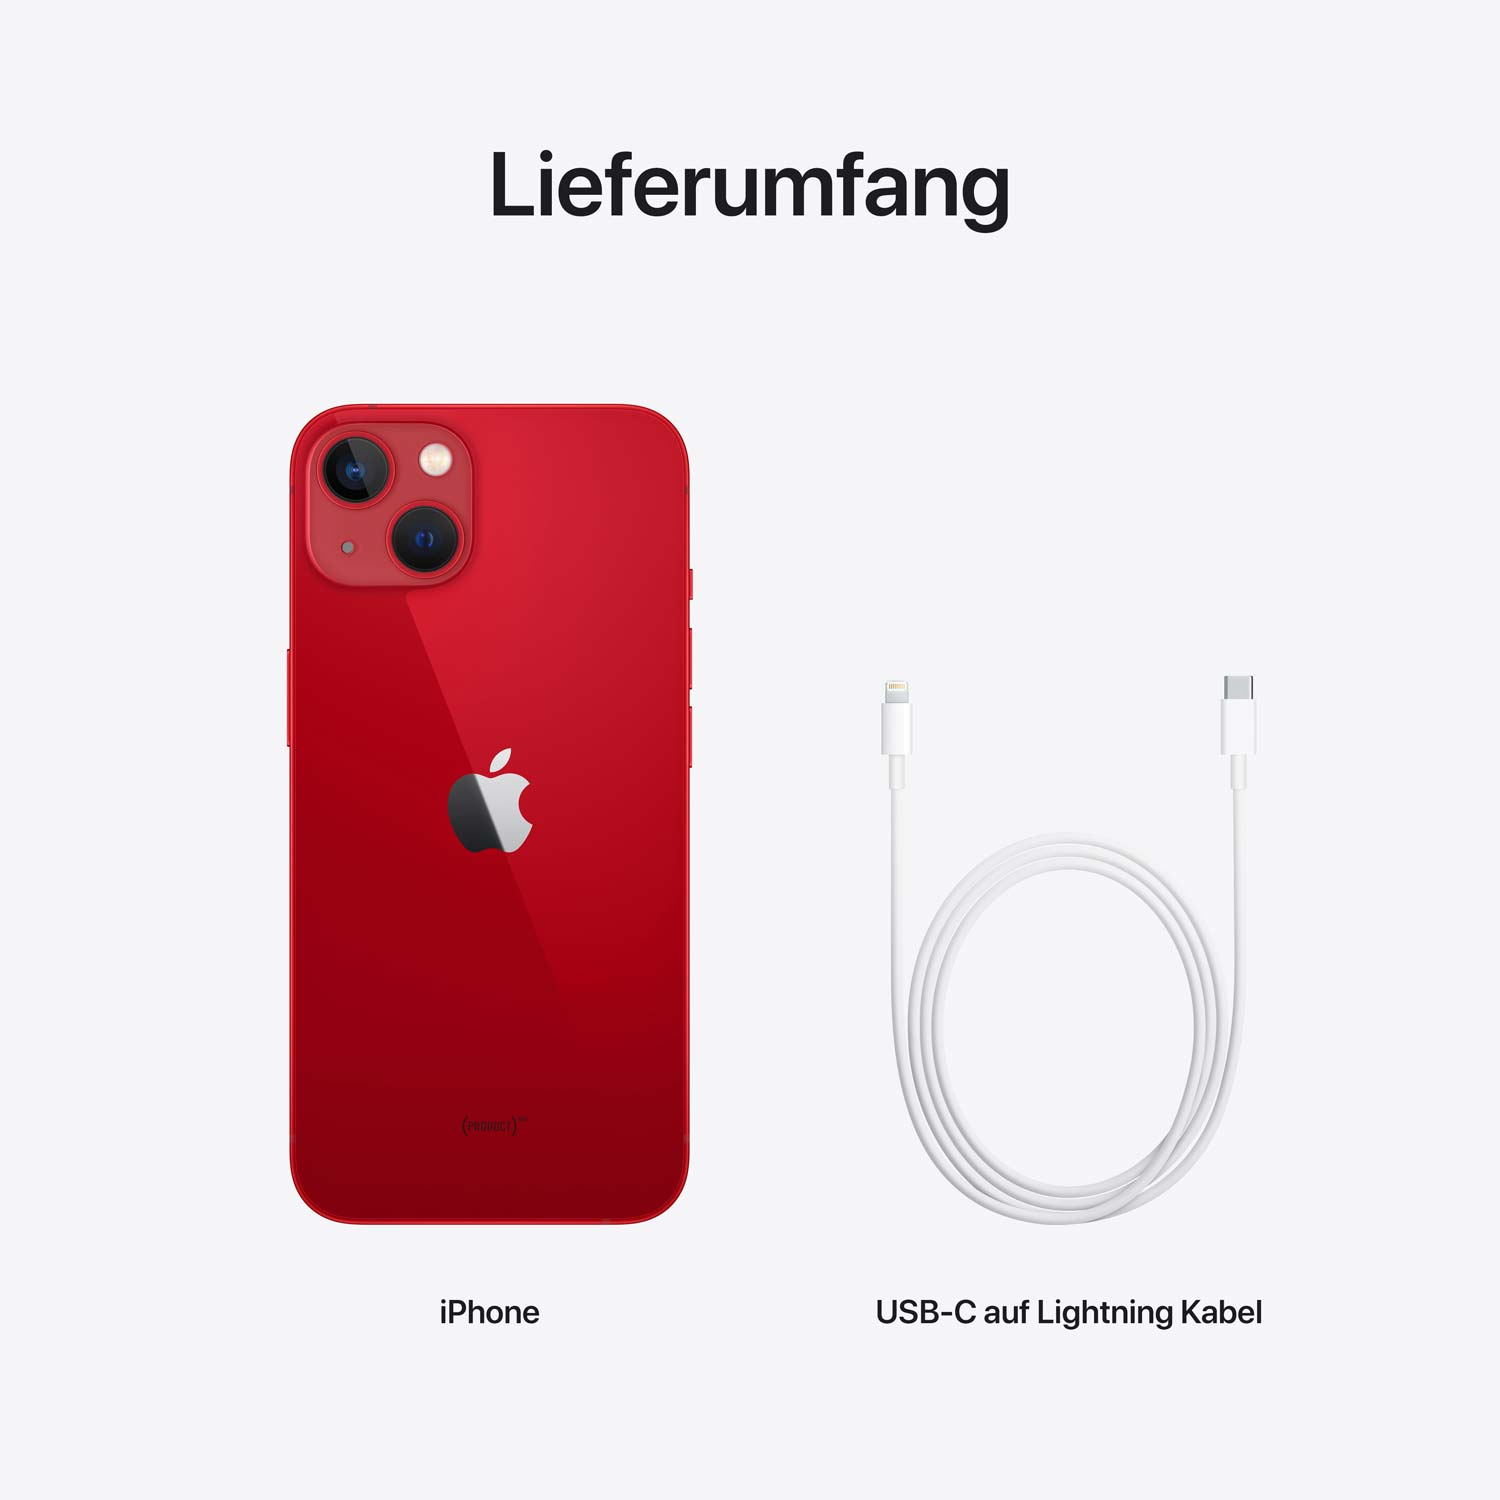 Apple iPhone 13 128GB - (PRODUCT)RED 